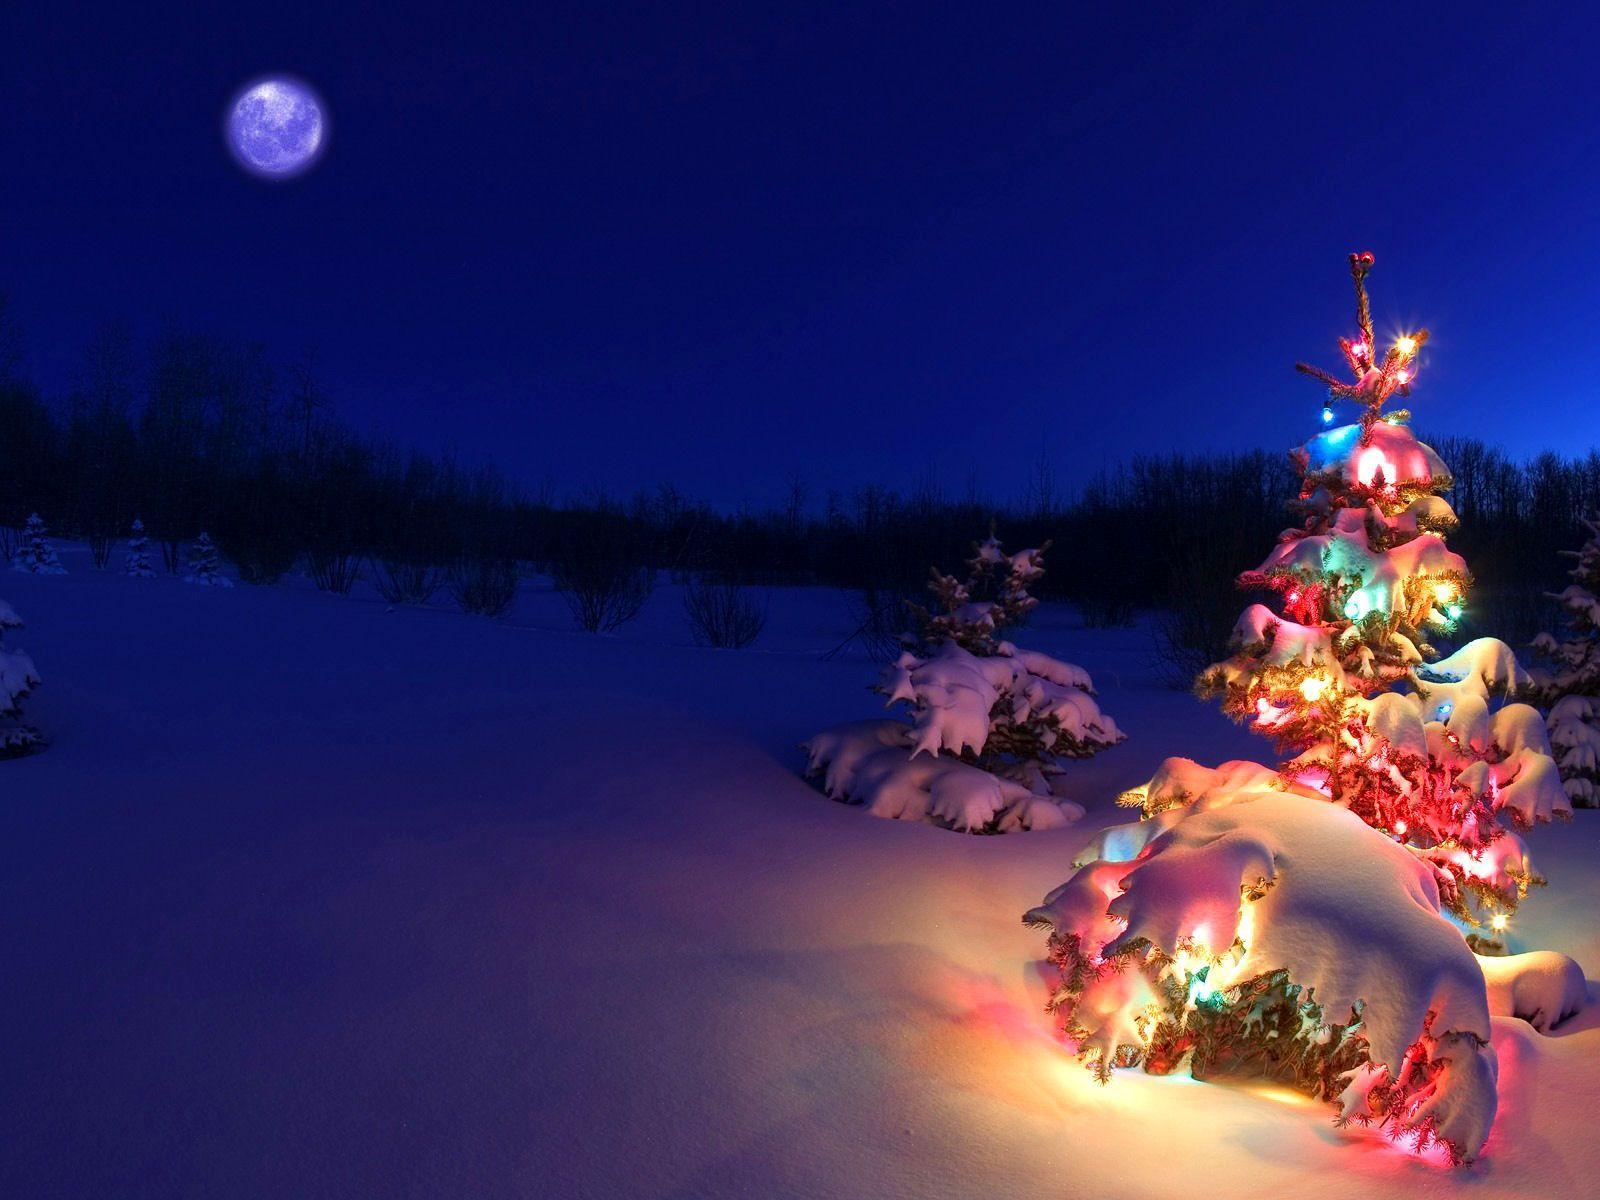 You have snow and a spruce? You have Christmas. Christmas wallpaper hd, Christmas desktop, Beautiful christmas trees